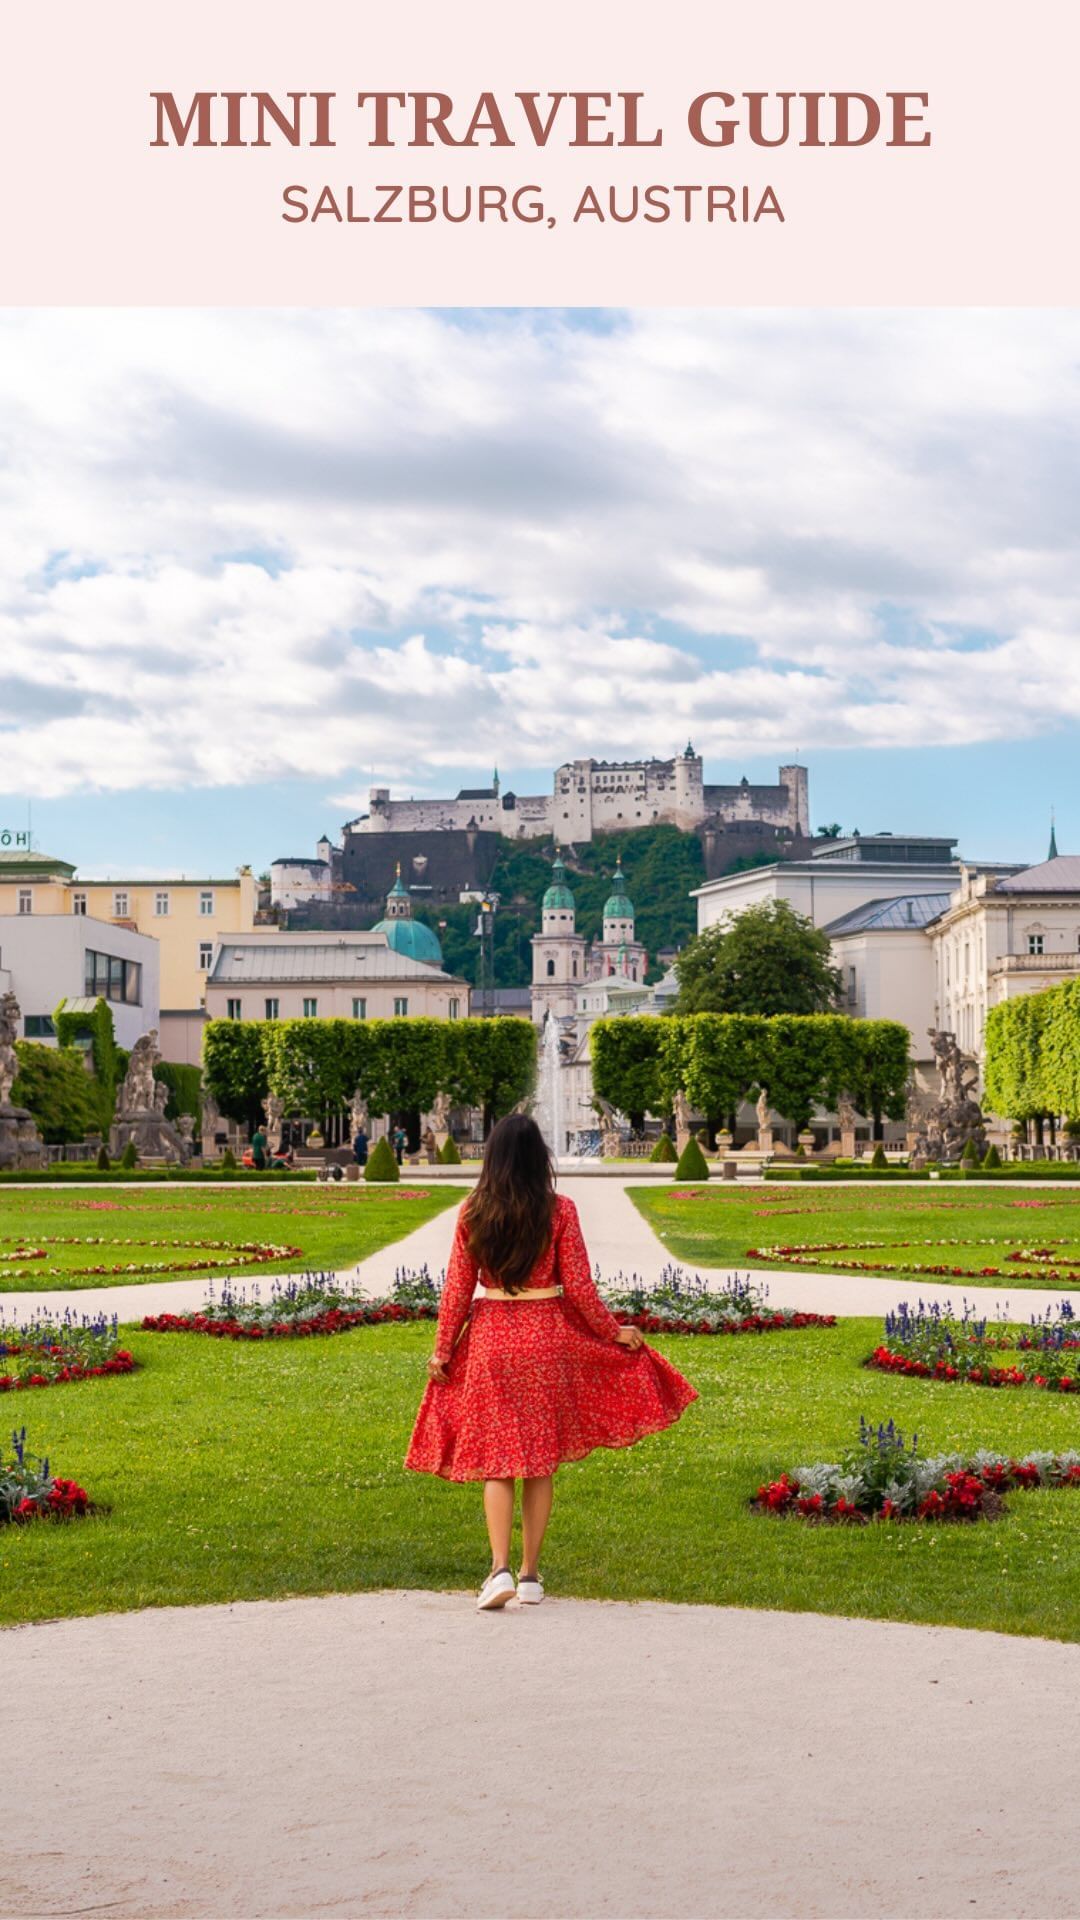 Cultural Delights of Salzburg and Surroundings